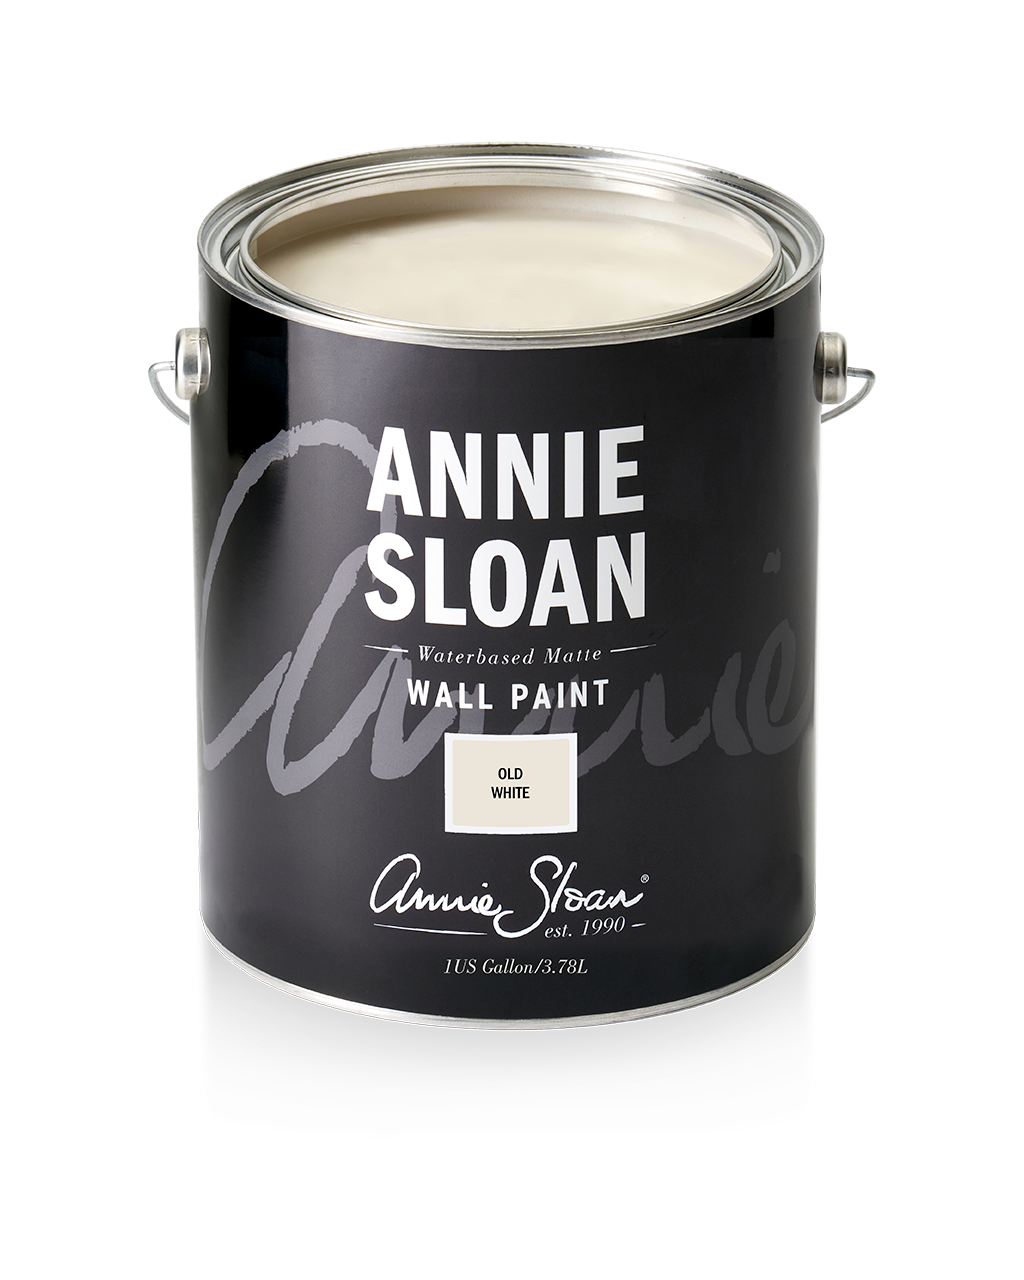 Annie Sloan Wall Paint Old White, 1 Gallon